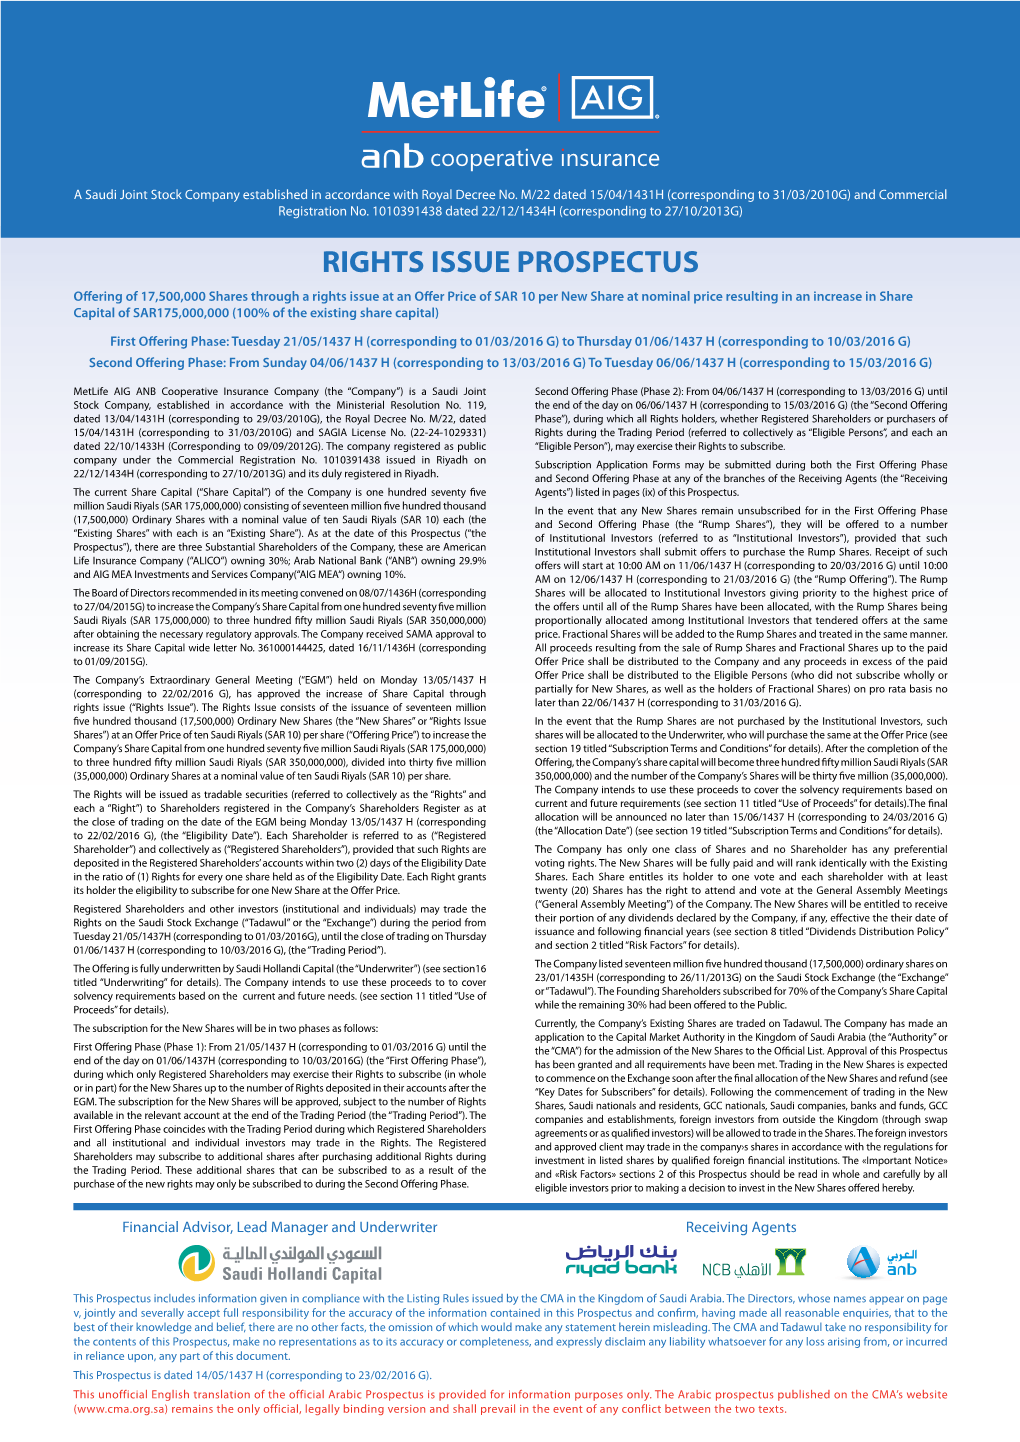 Rights Issue Prospectus